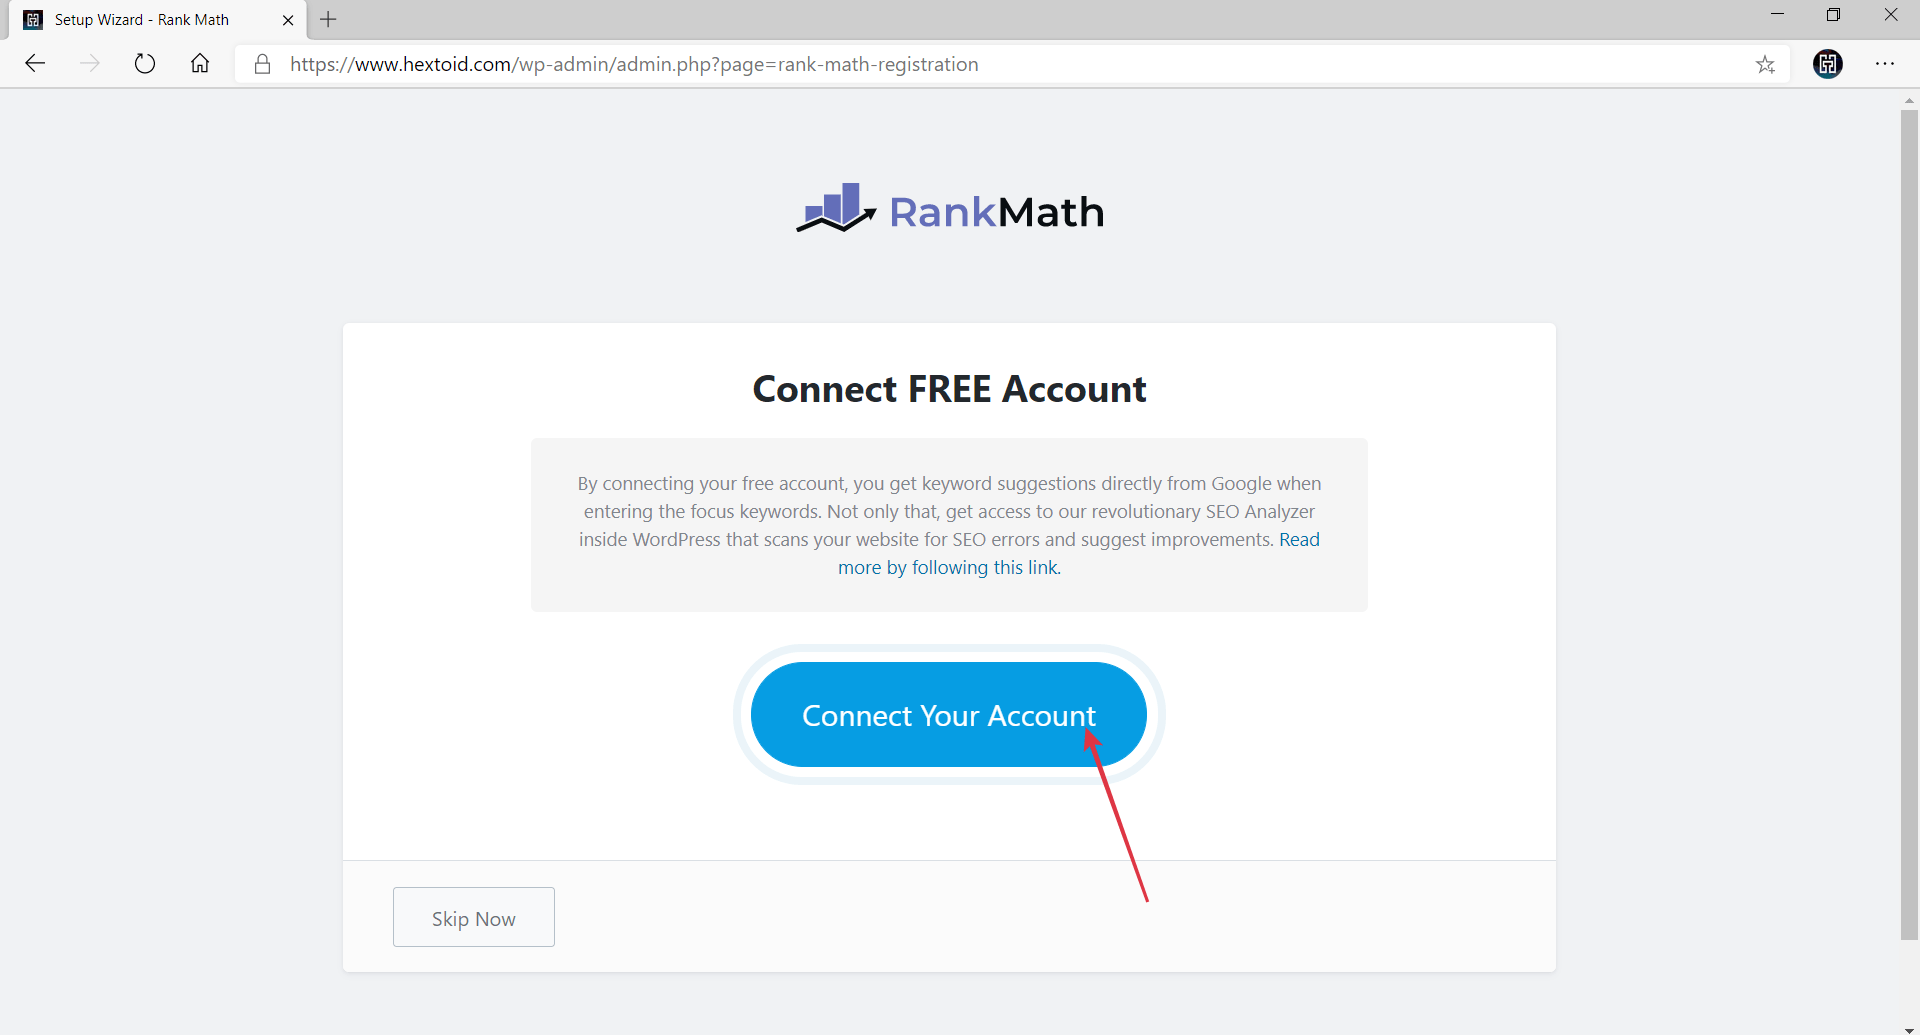 Click Connect Your Account